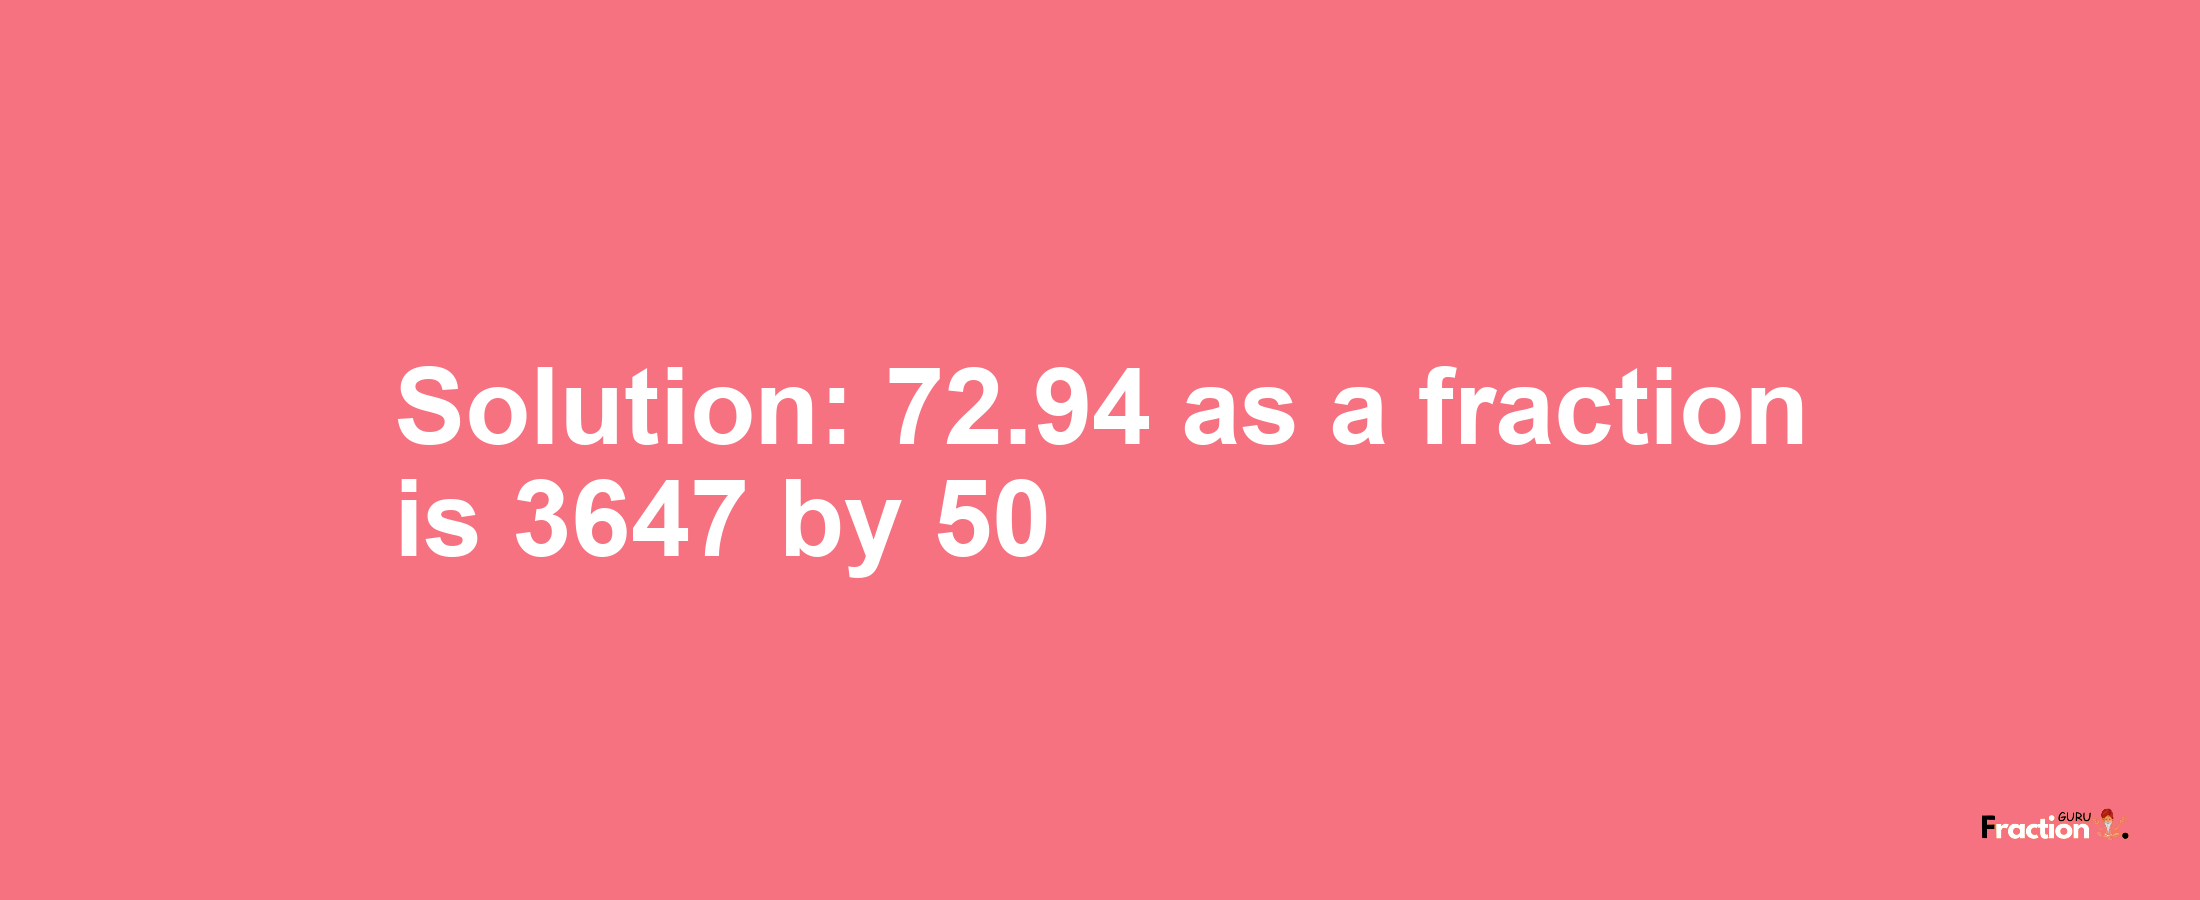 Solution:72.94 as a fraction is 3647/50